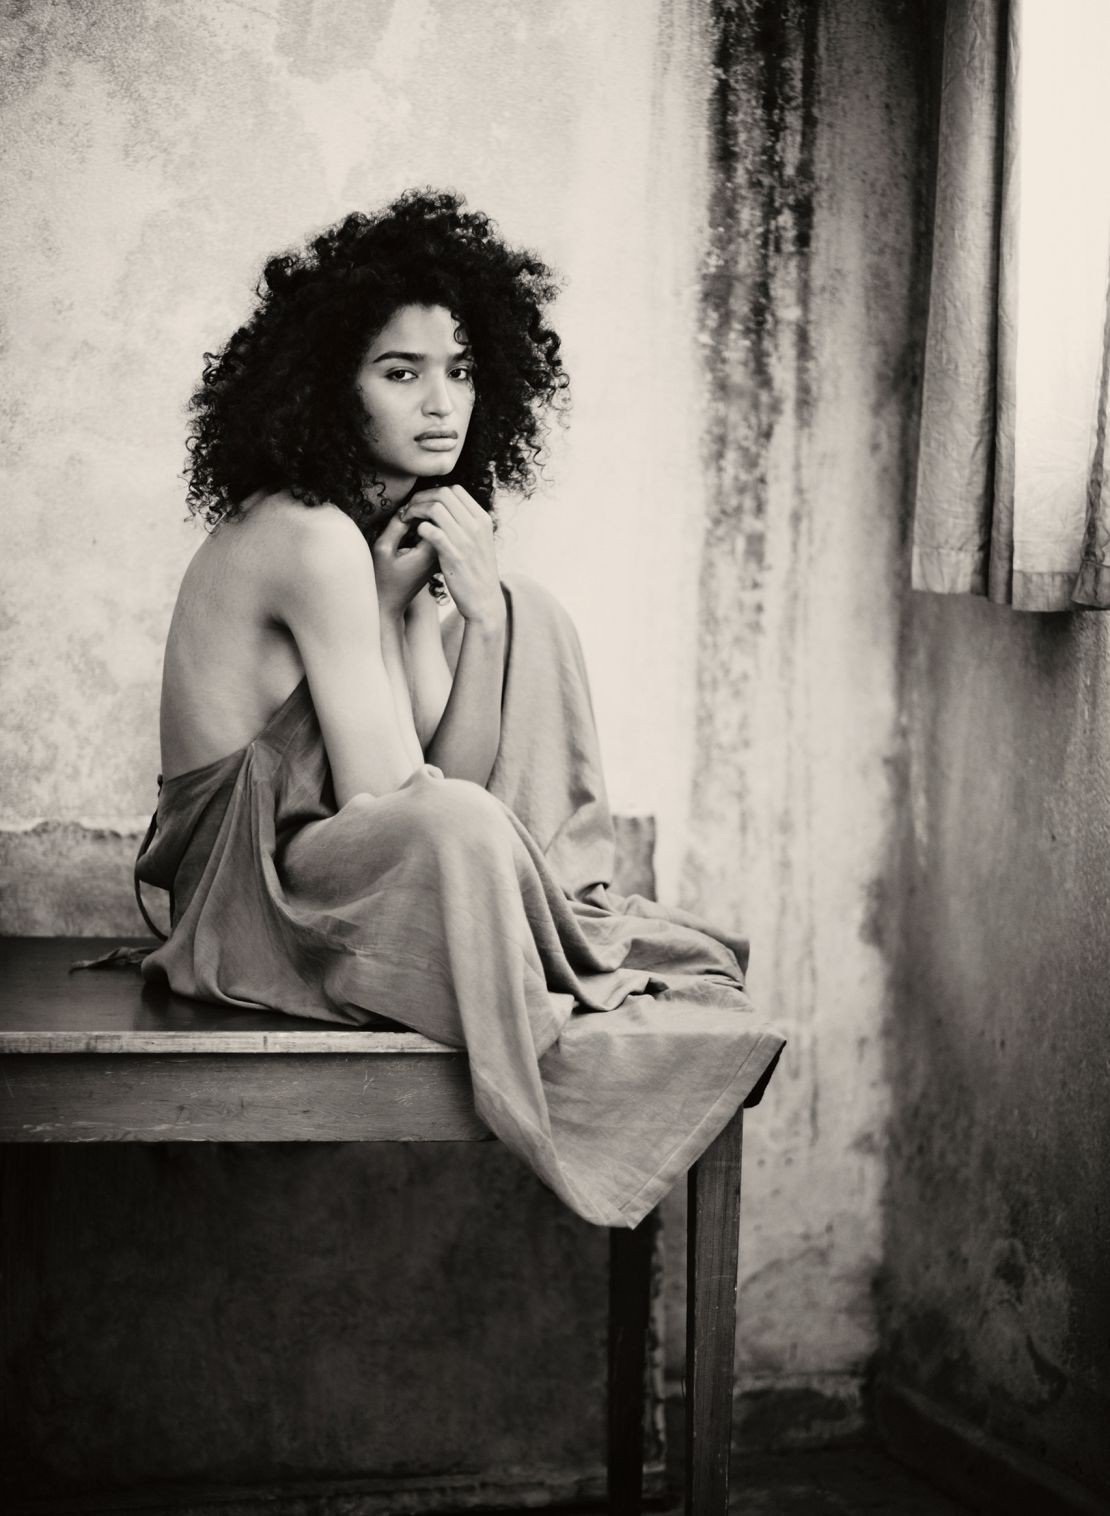 Indya Moore by Paolo Roversi for Pirelli's 2020 calendar.